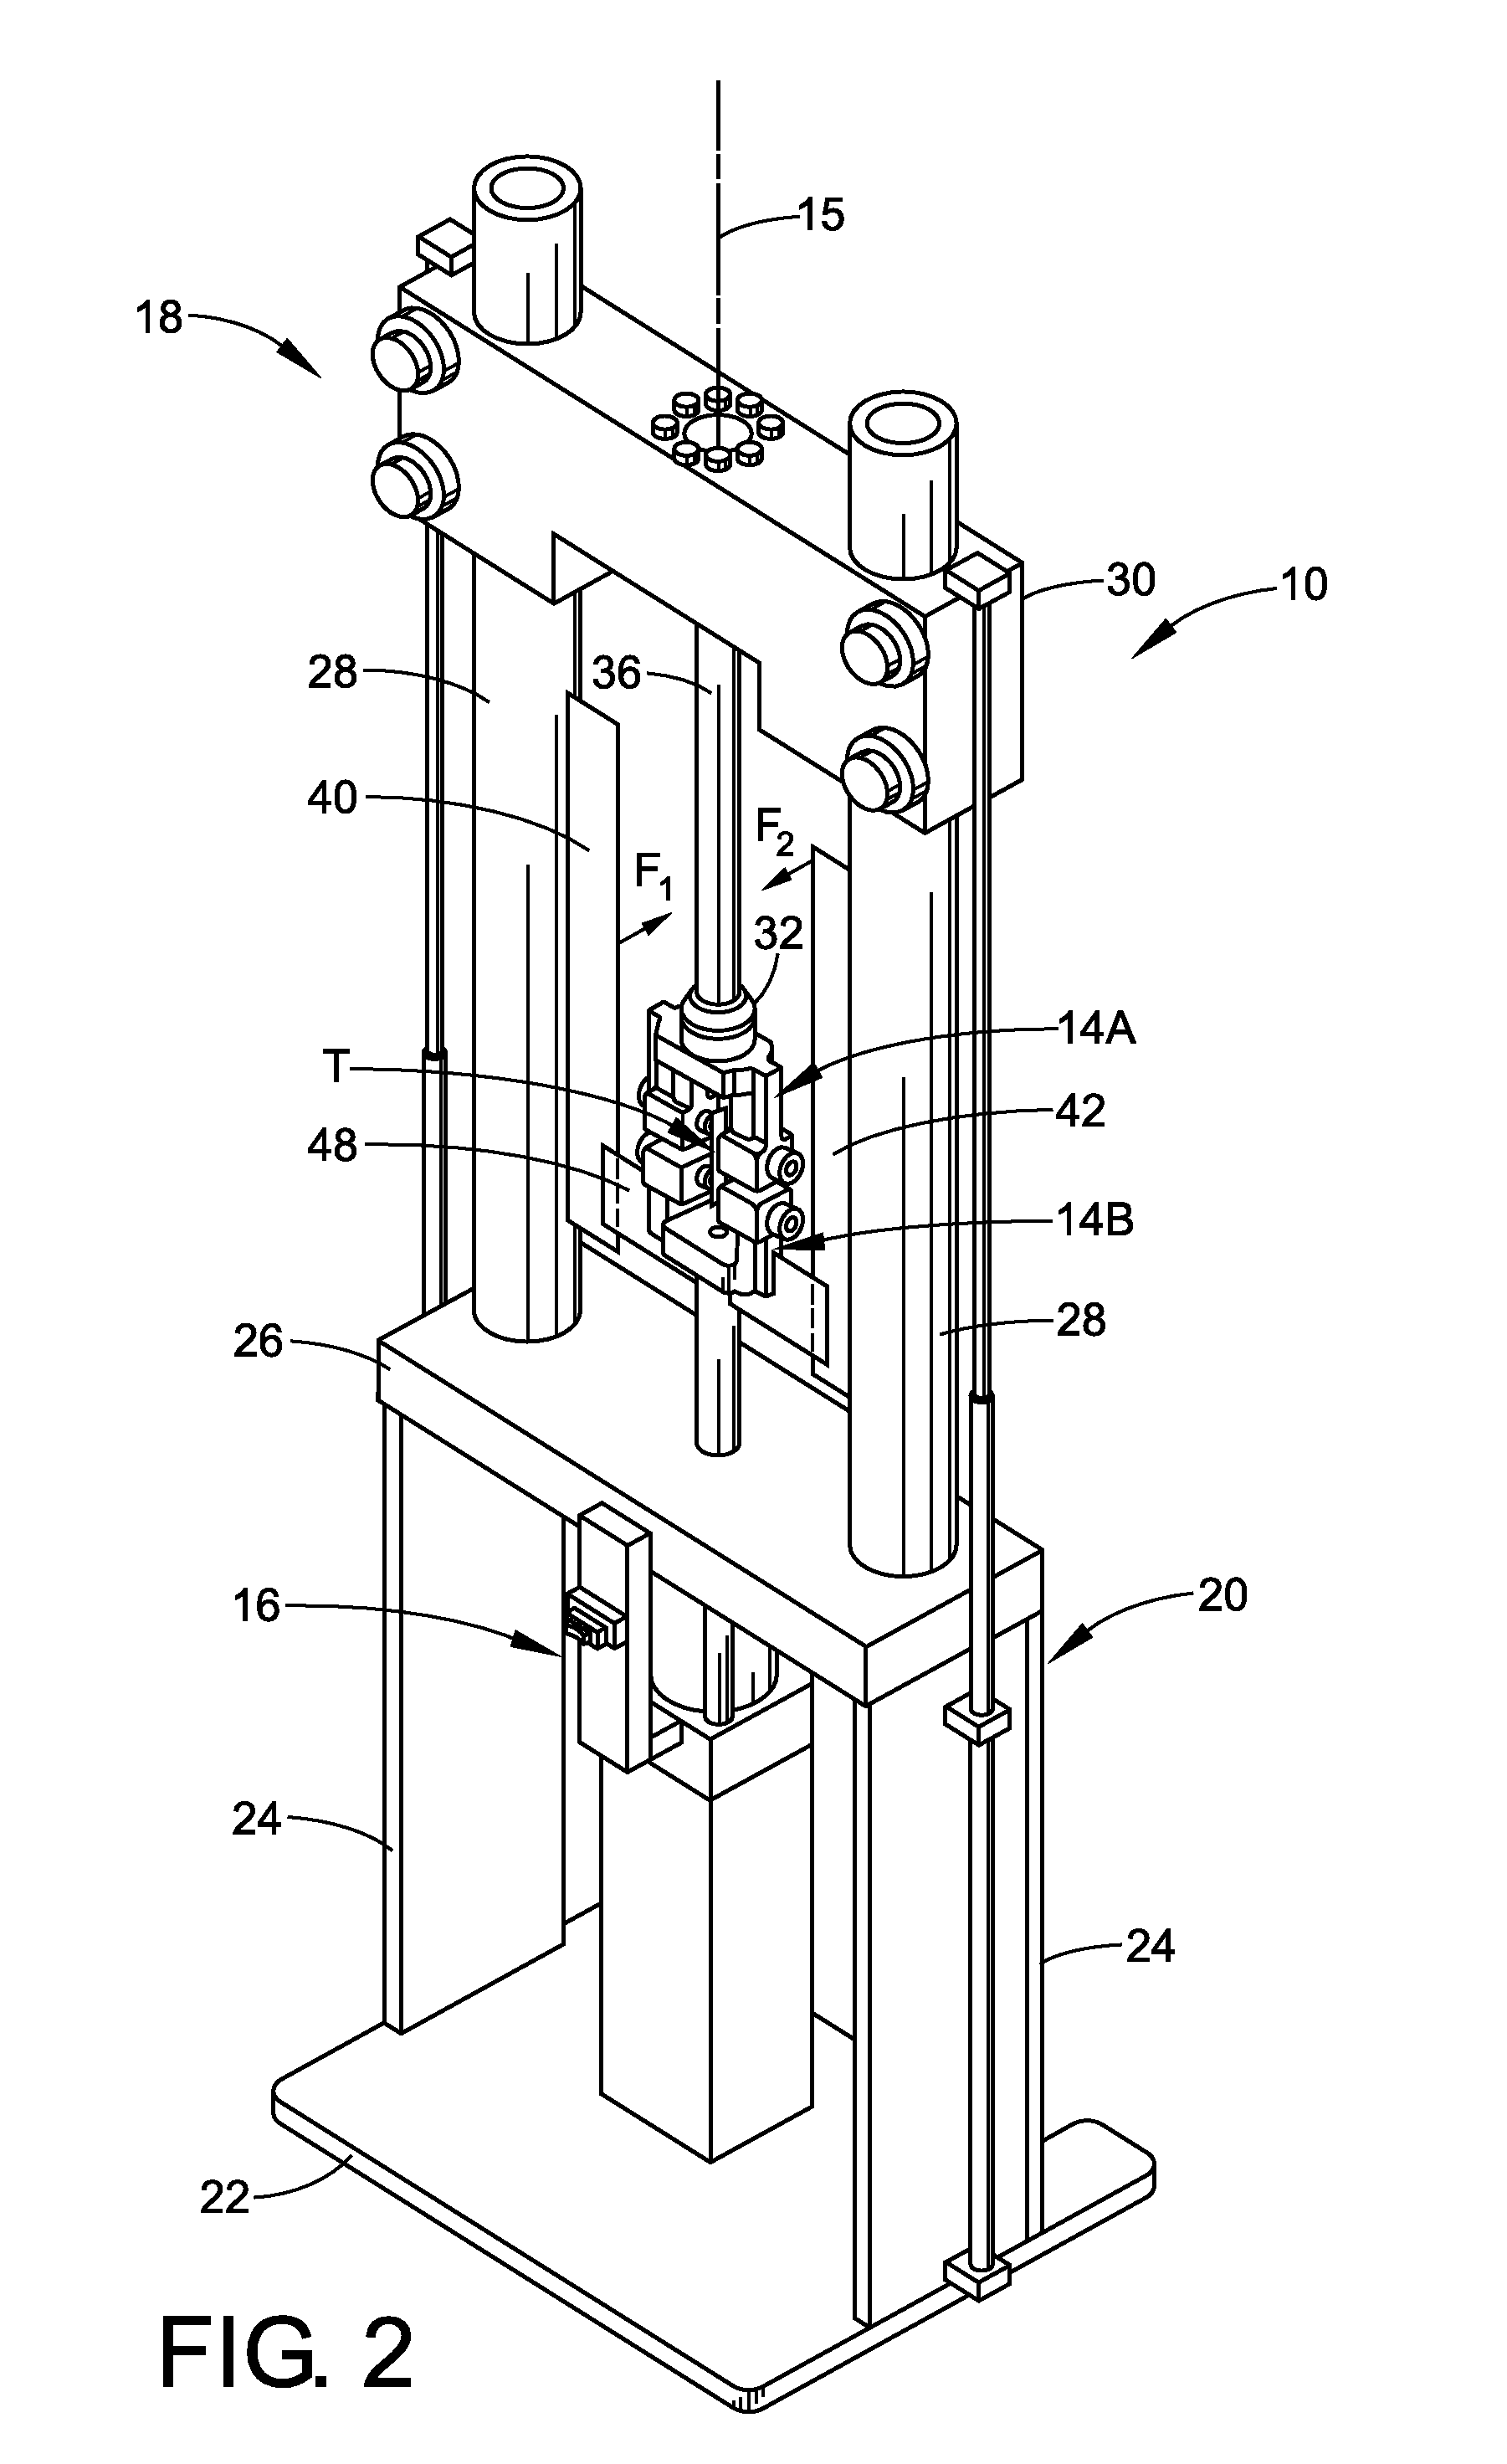 Electromagnetic rotation and stability apparatus